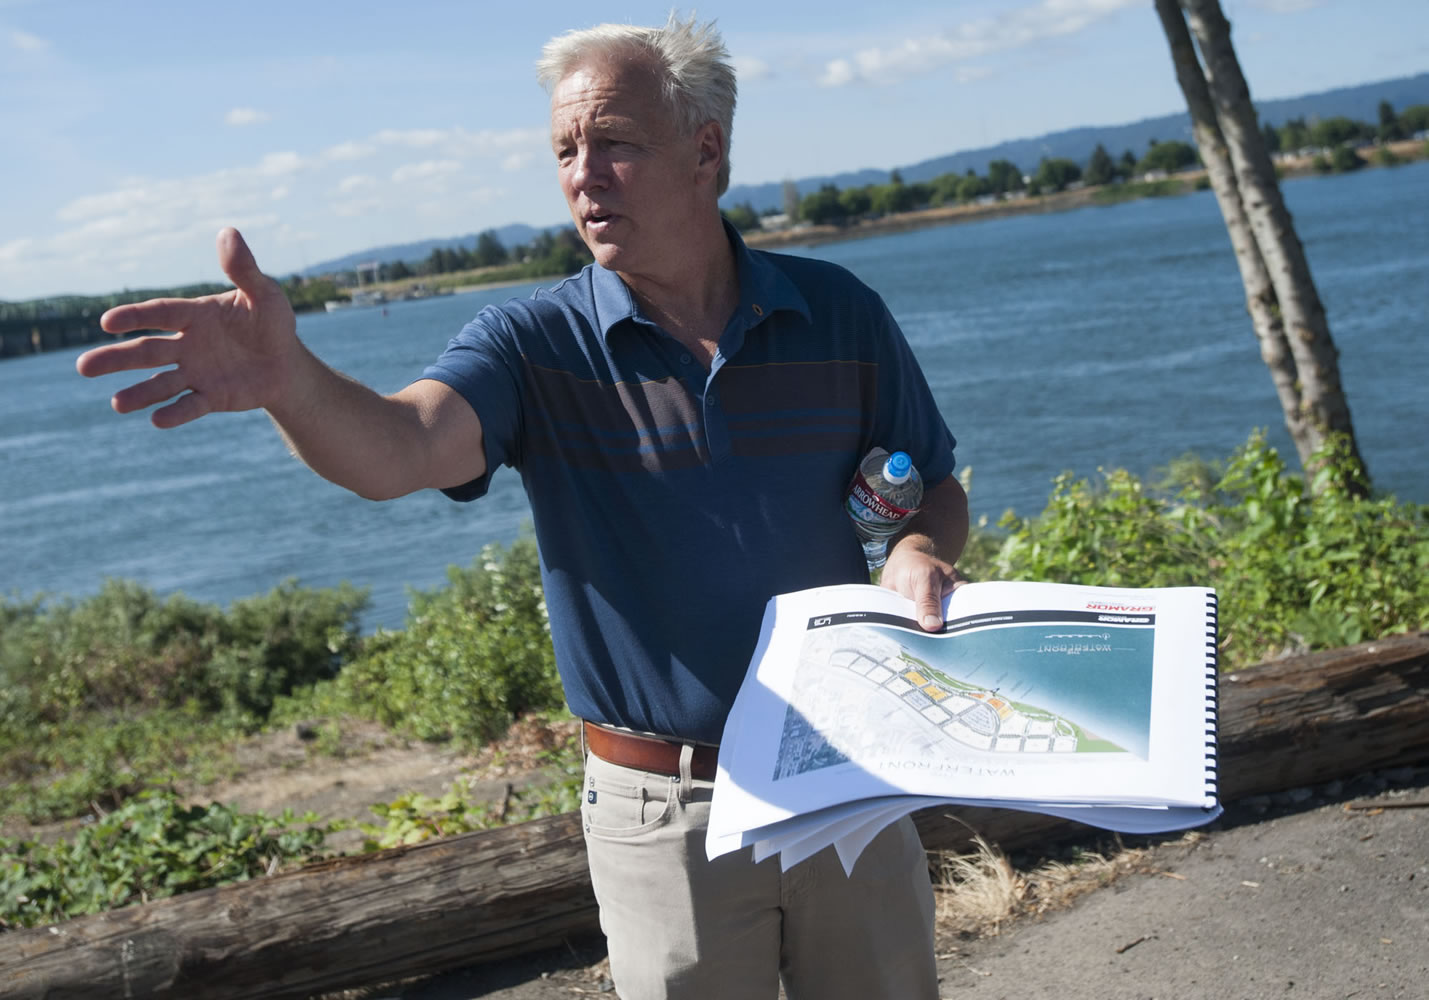 Barry Cain, president of Tualatin-based Gramor Development Inc., talks July 15 about the waterfront development under construction in Vancouver.